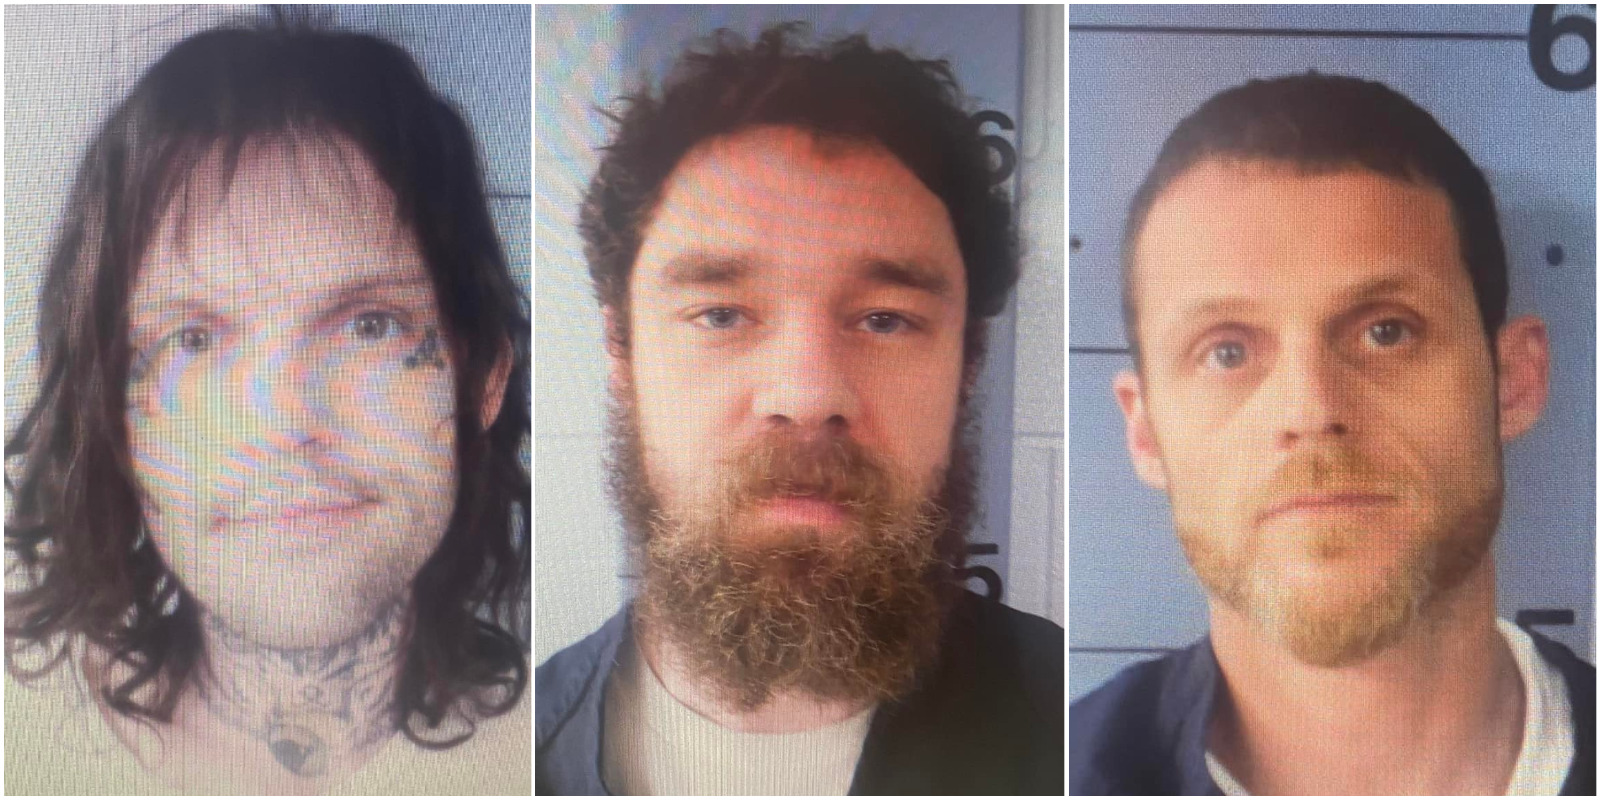 Escaped Barry County inmates still on the loose, but authorities are